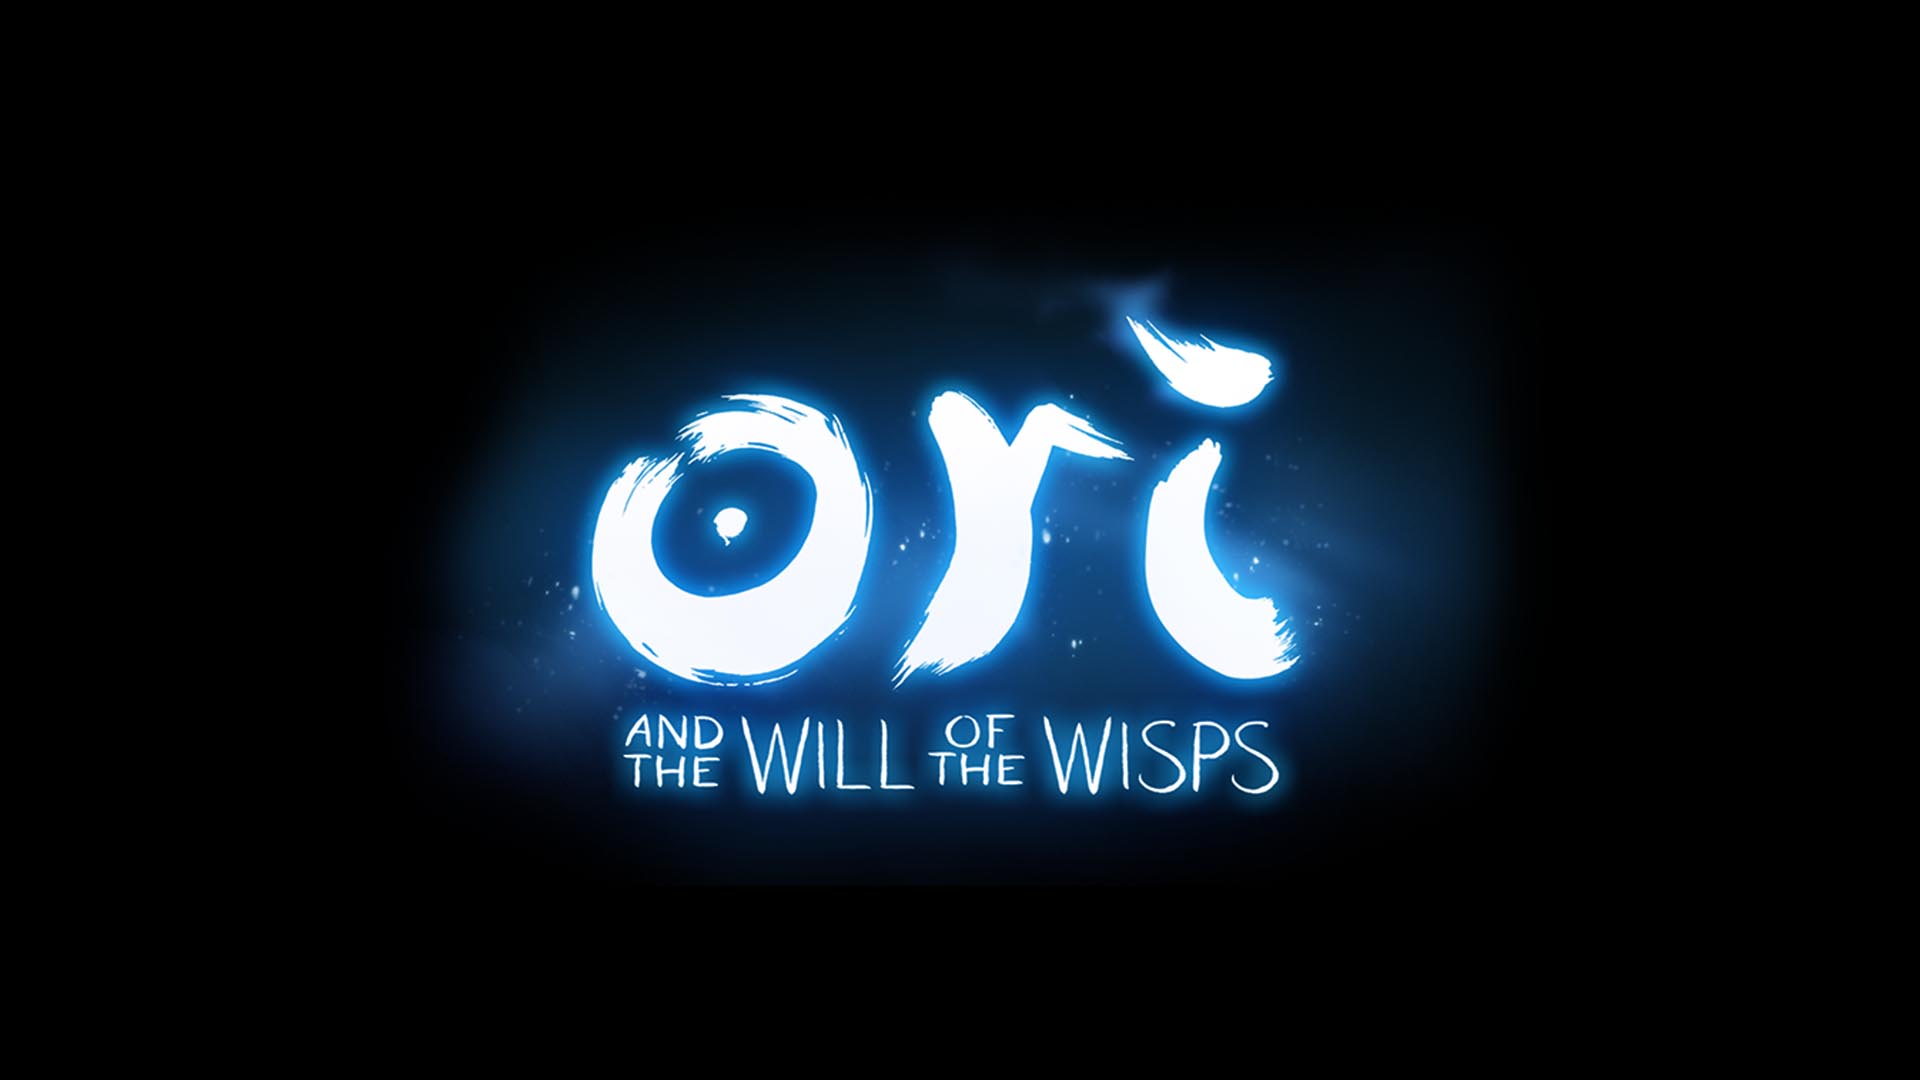 Logros de Ori and the Will of the Wisps